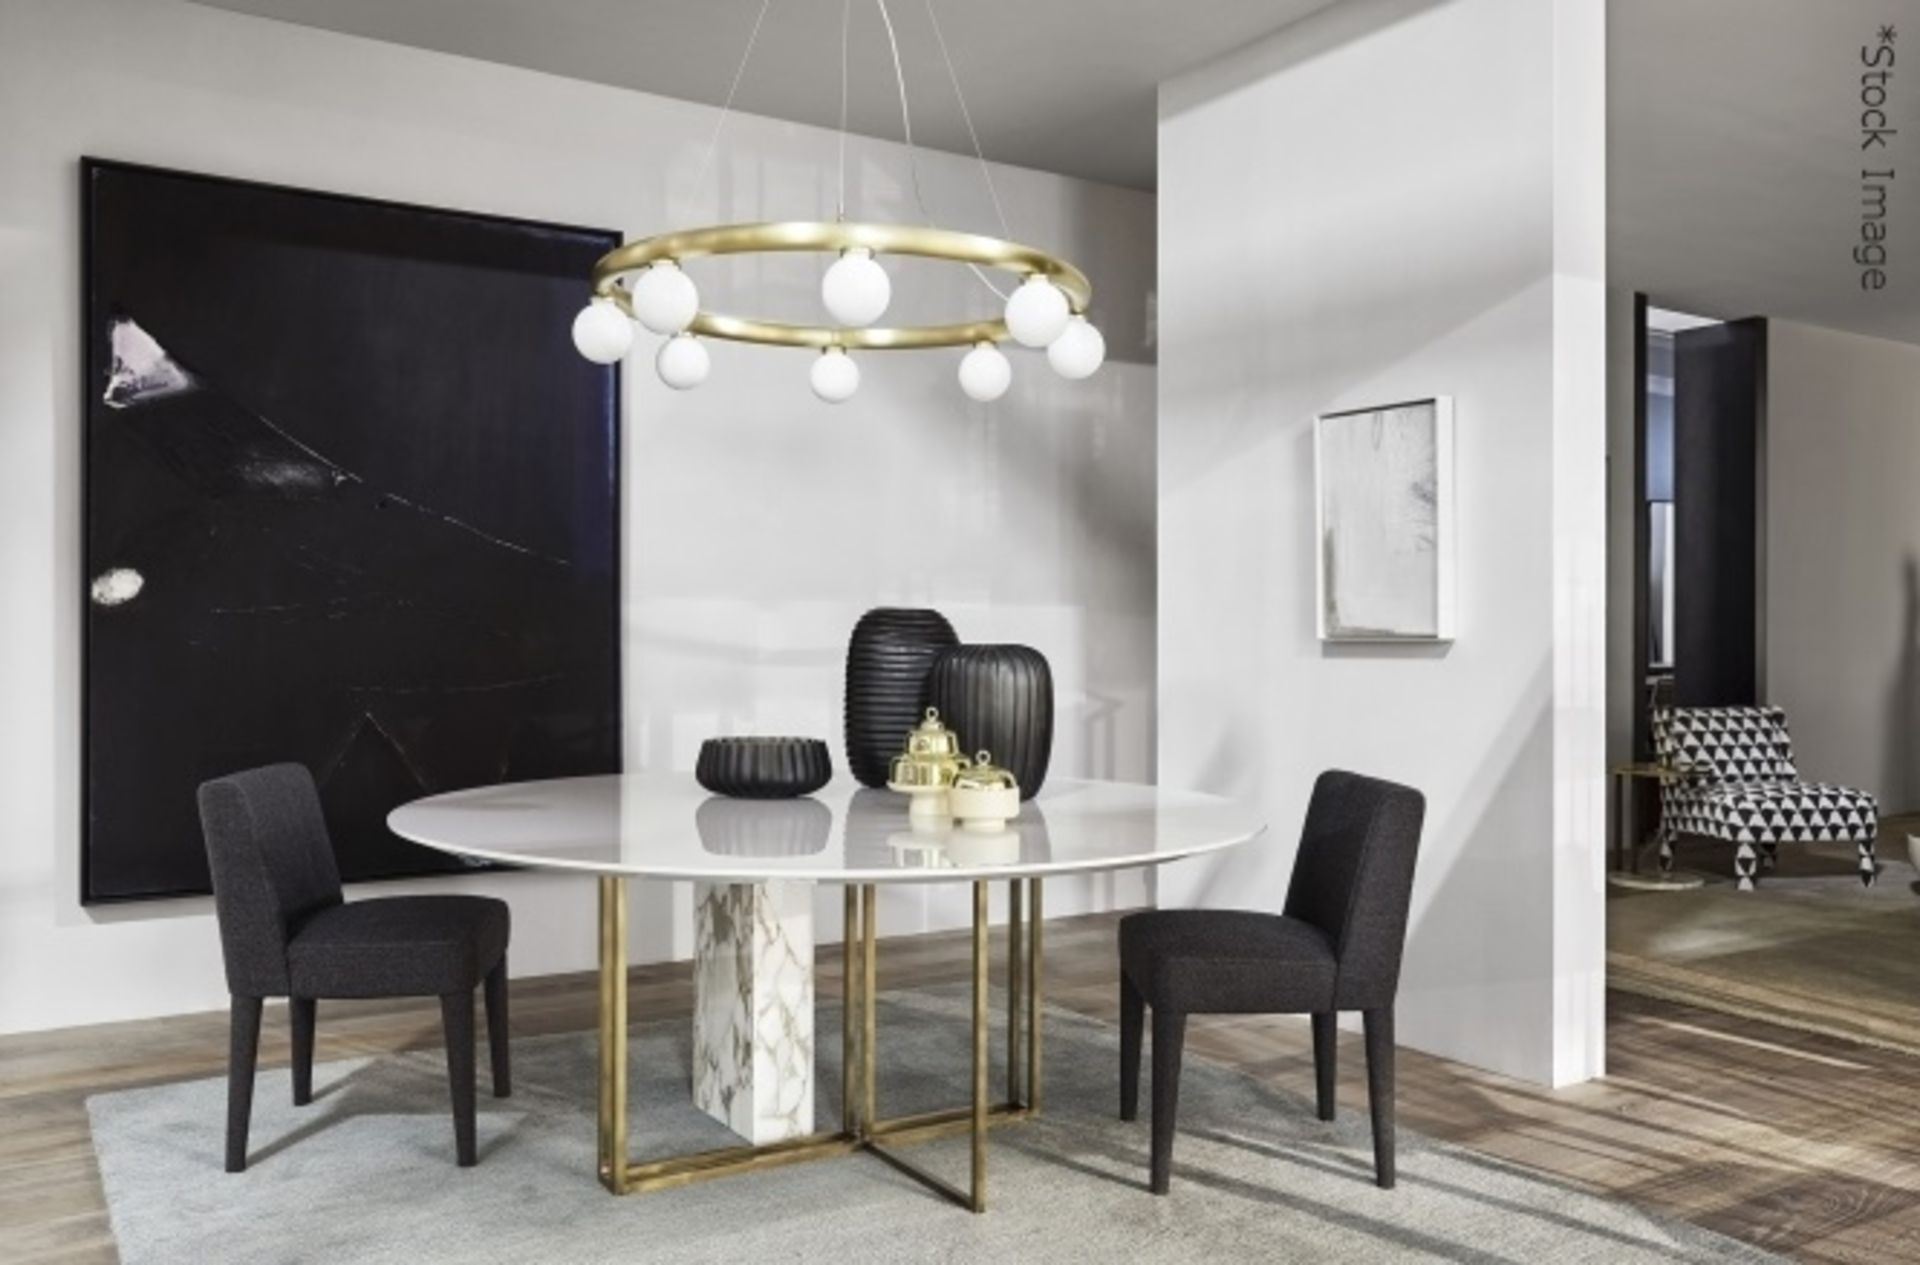 1 x Huge Luxury Statement Circular 8-Light Chandelier In Brass With Opal Shades - Price £3,540 - Image 4 of 10